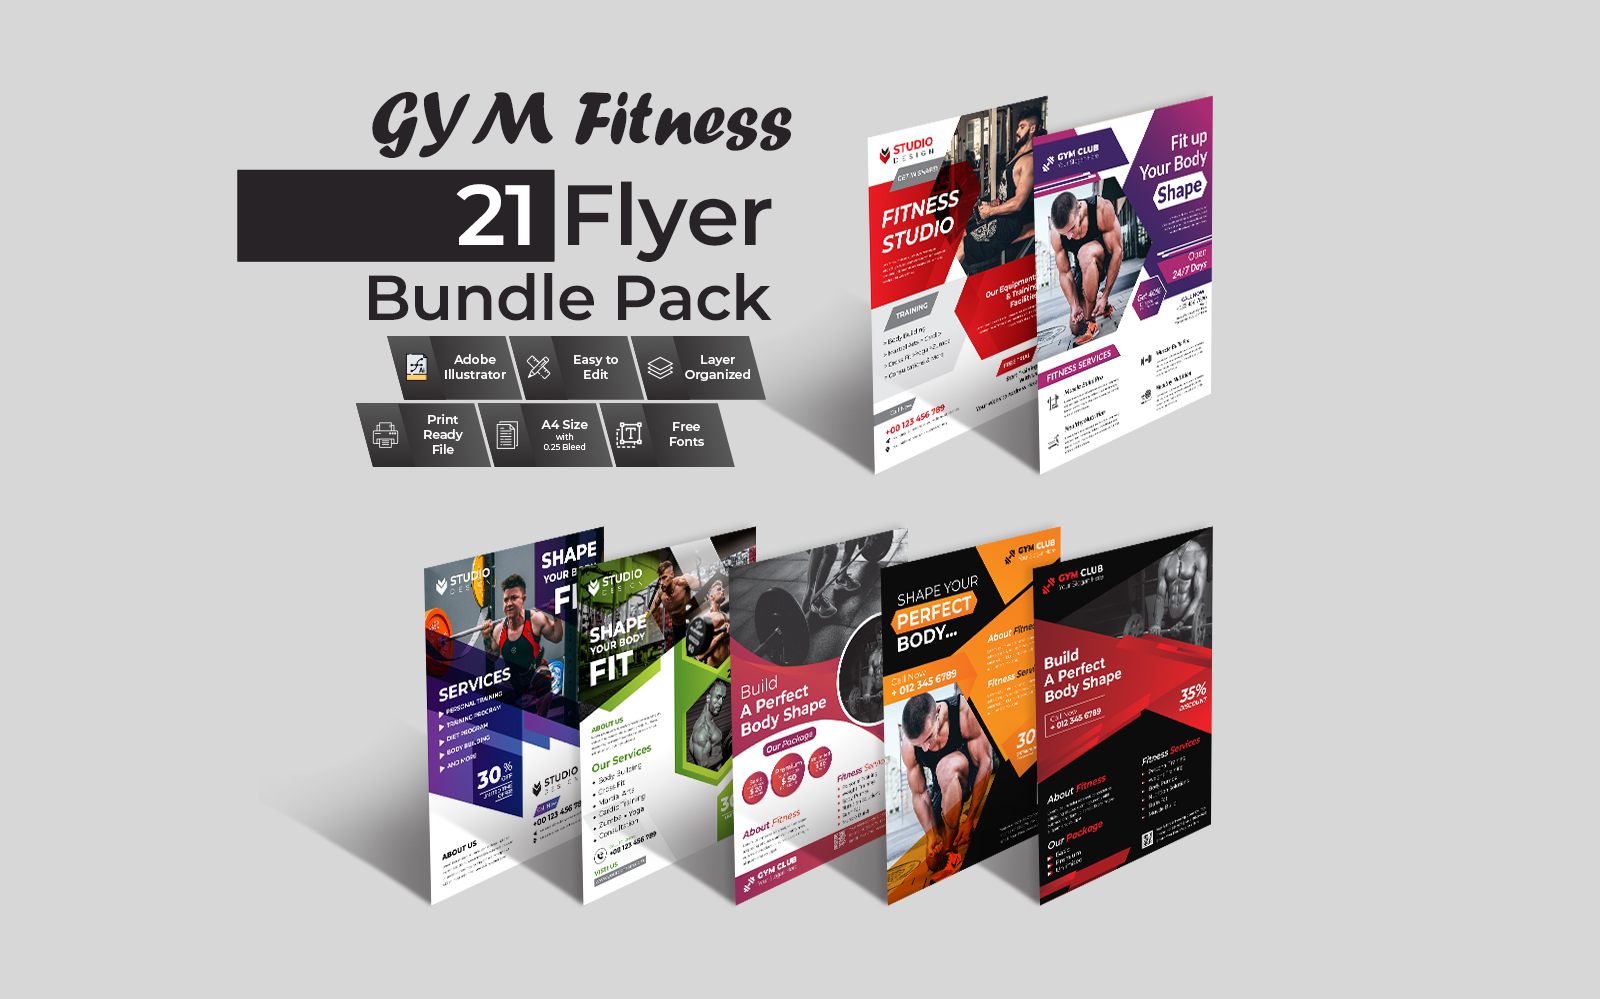 Modern GYM Fitness Flyer Collection - Corporate Identity Template